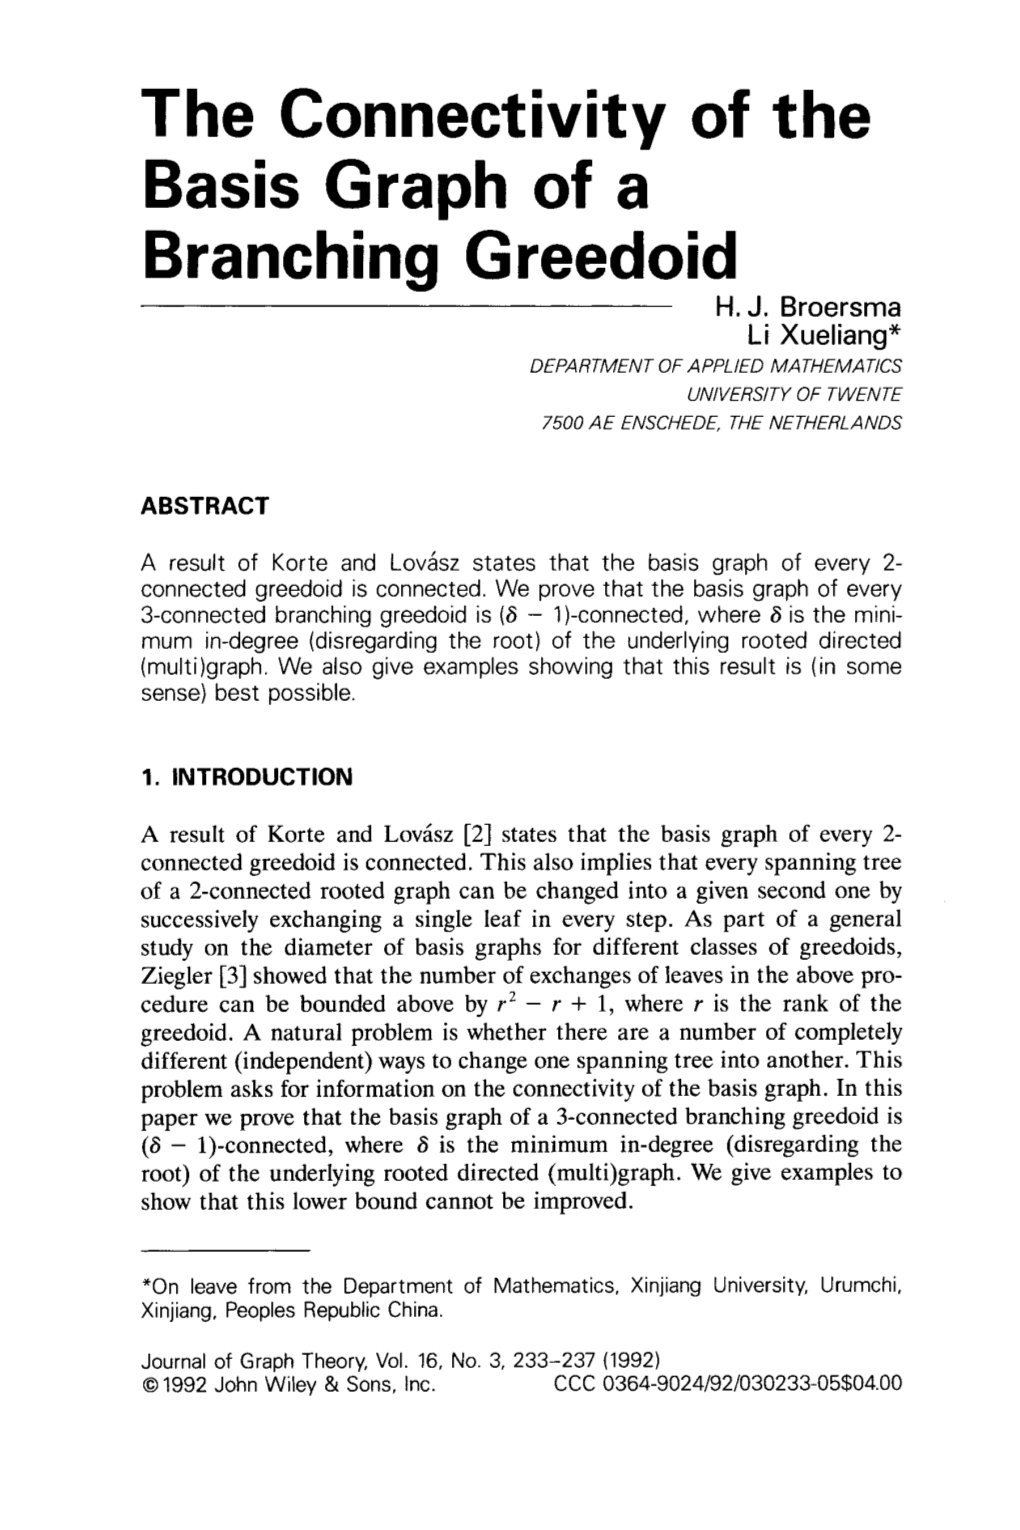 The Connectivity of the Basis Graph of a Branching Greedoid